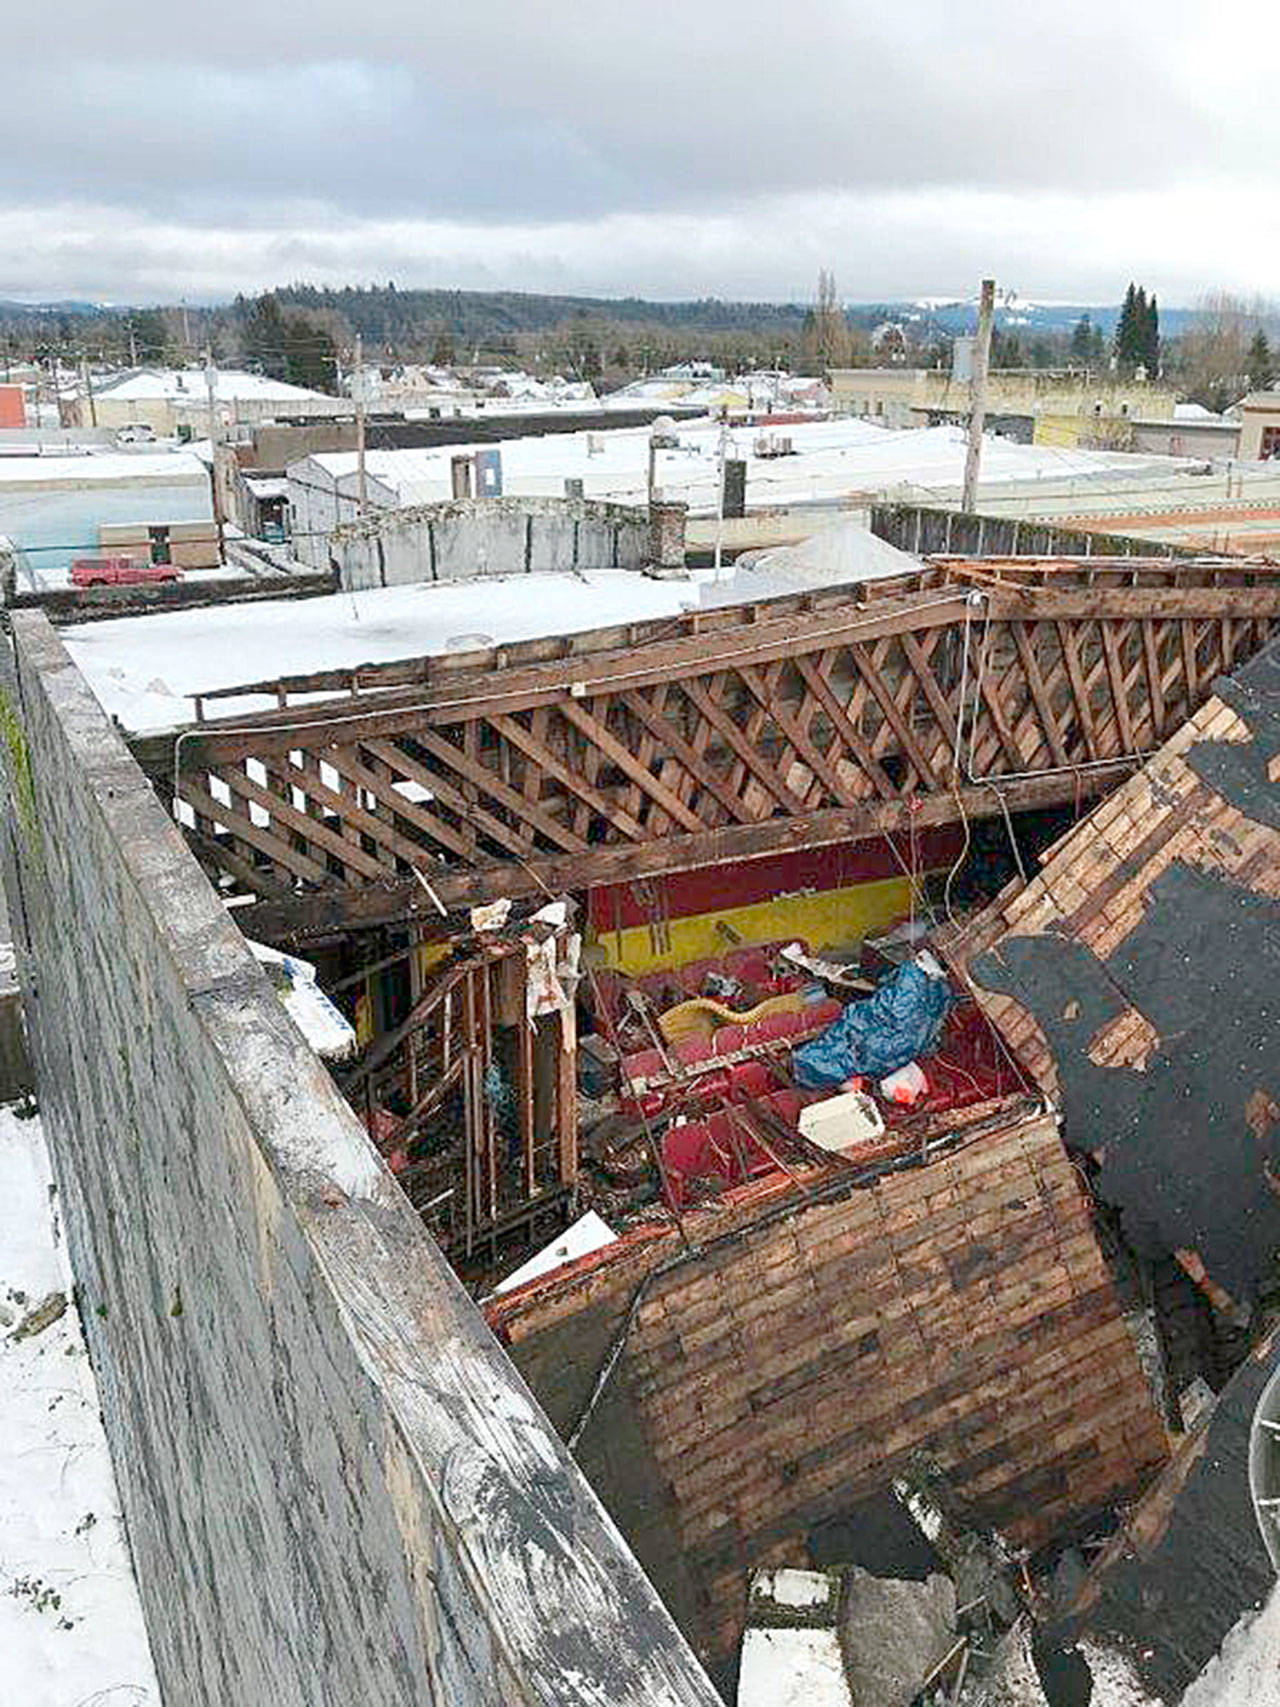 (Courtesy Edna Porter and the city of Elma) The roof of the old Elma Theater has fallen into the building.